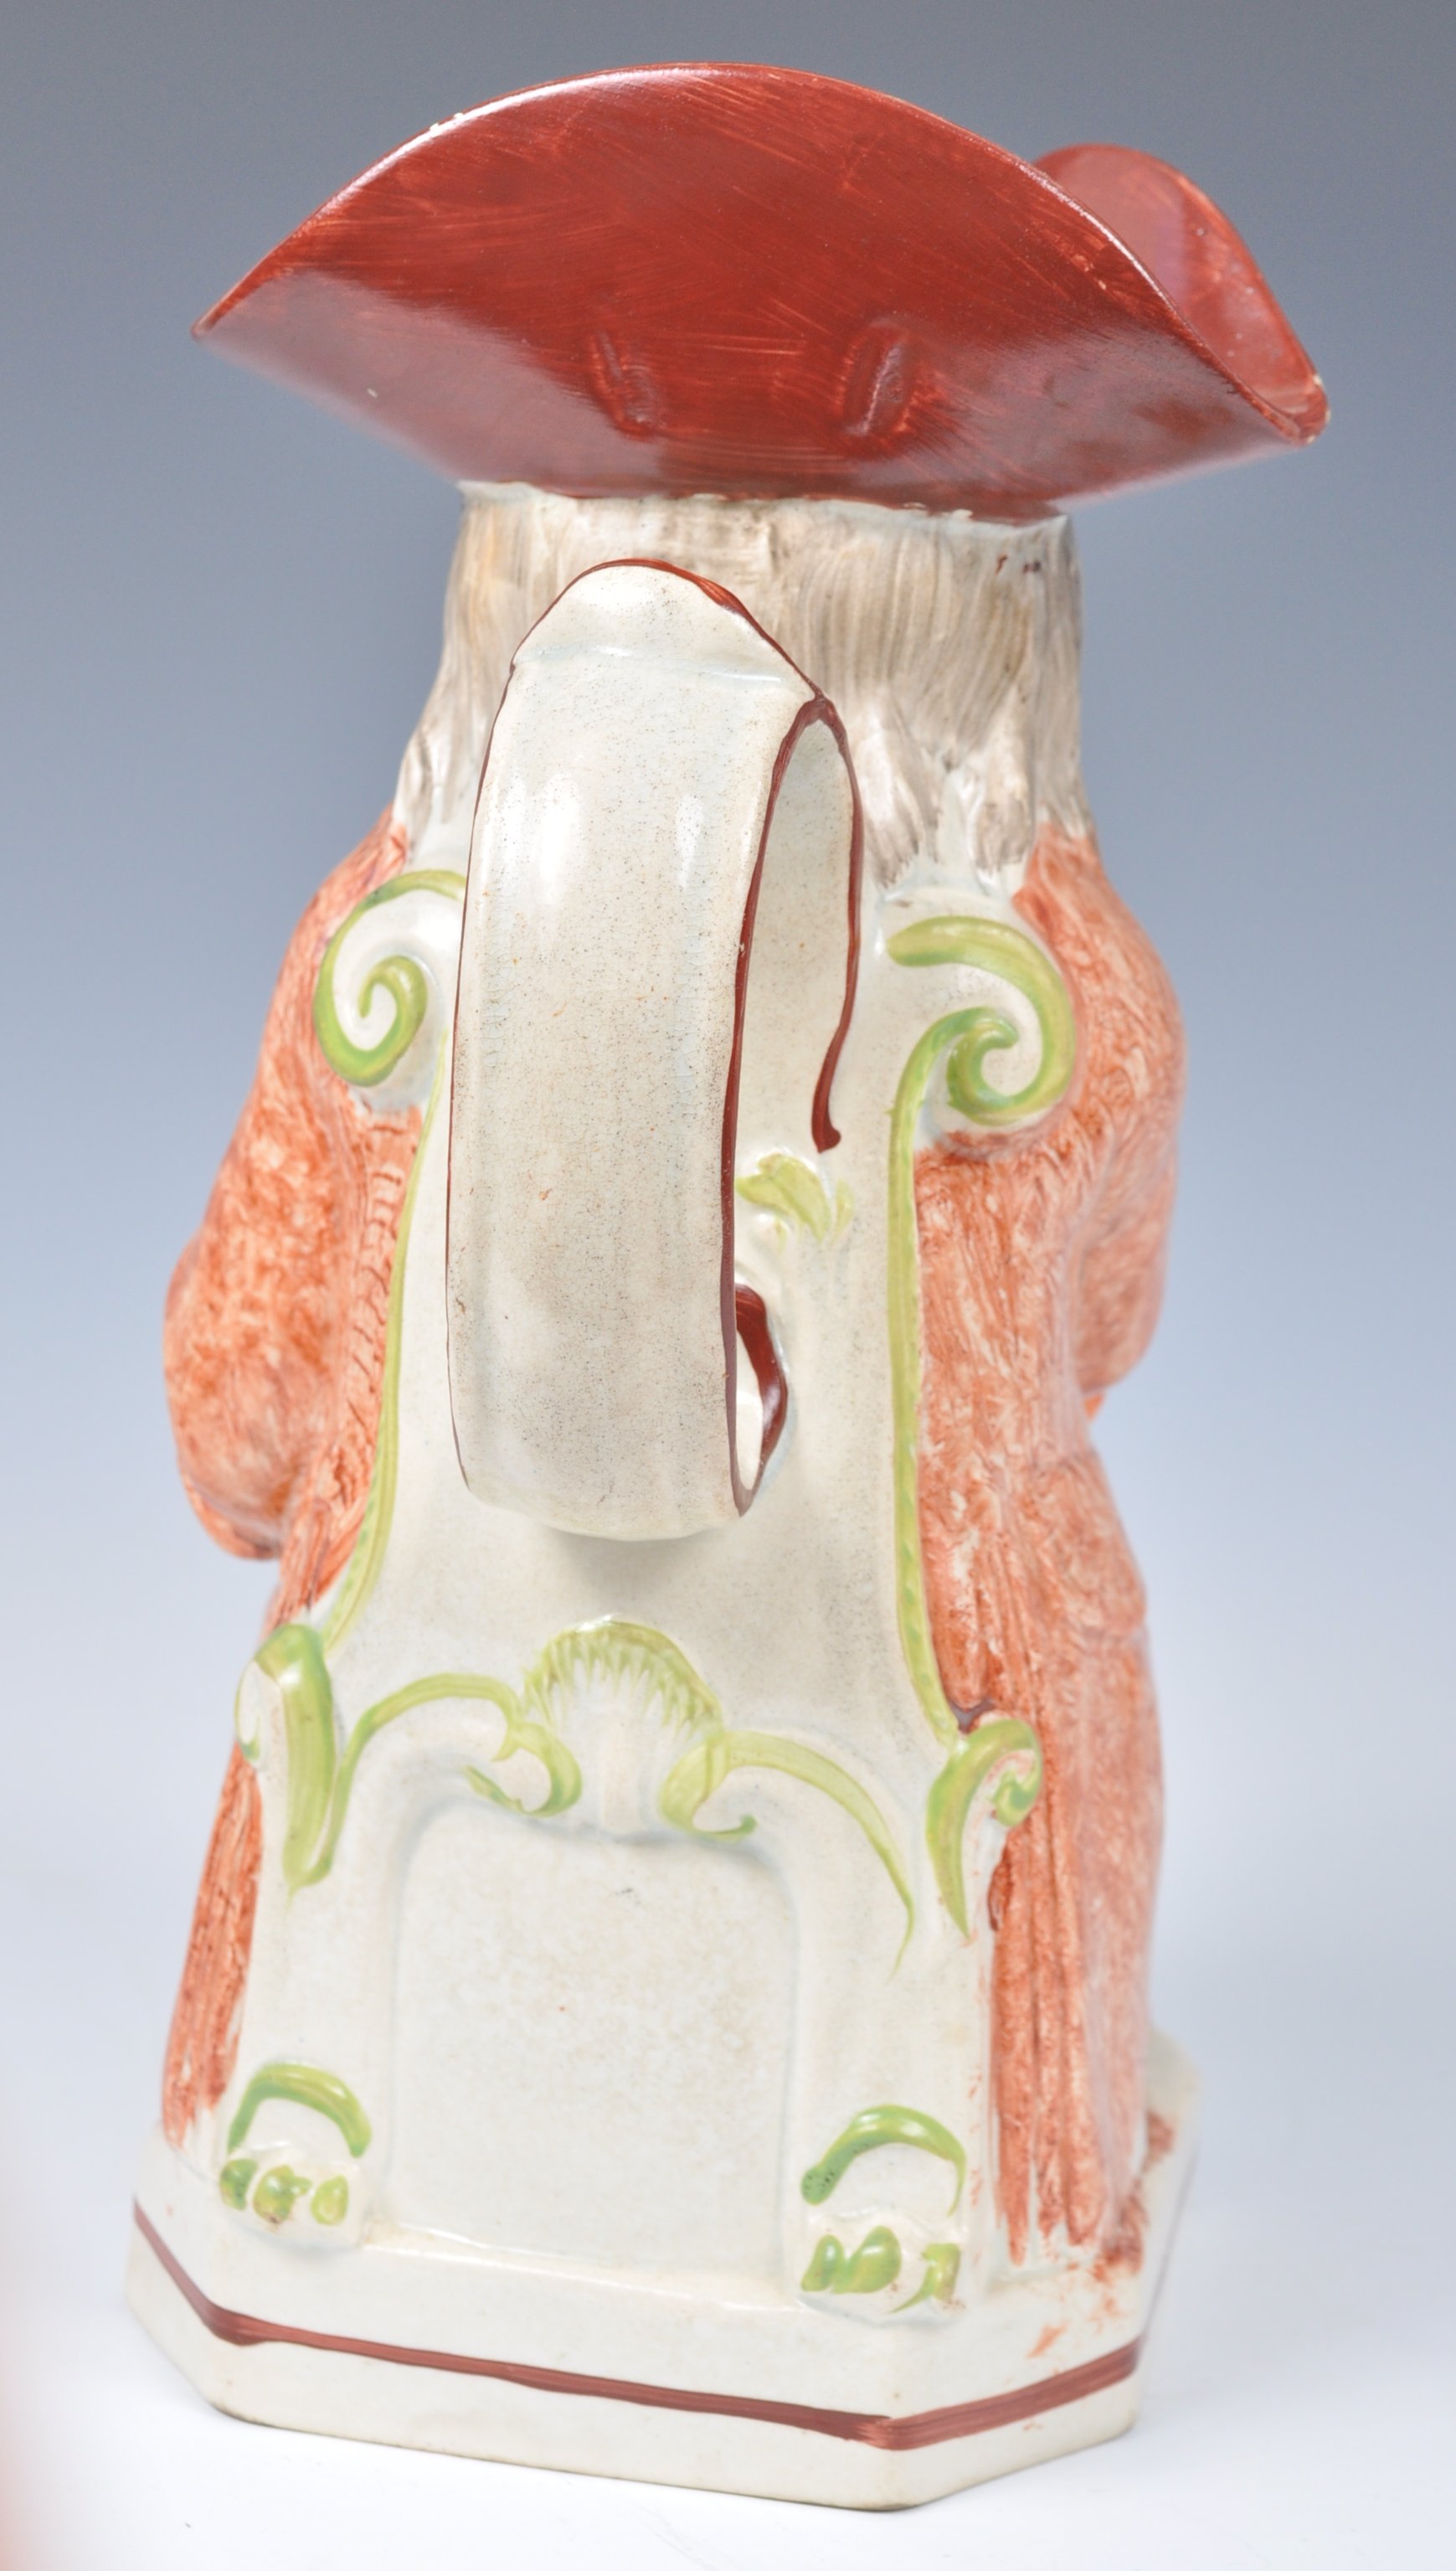 LATE 18TH CENTURY PEARLWARE TOBY / CHARACTER JUG ' GOOD ALE ' - Image 3 of 6